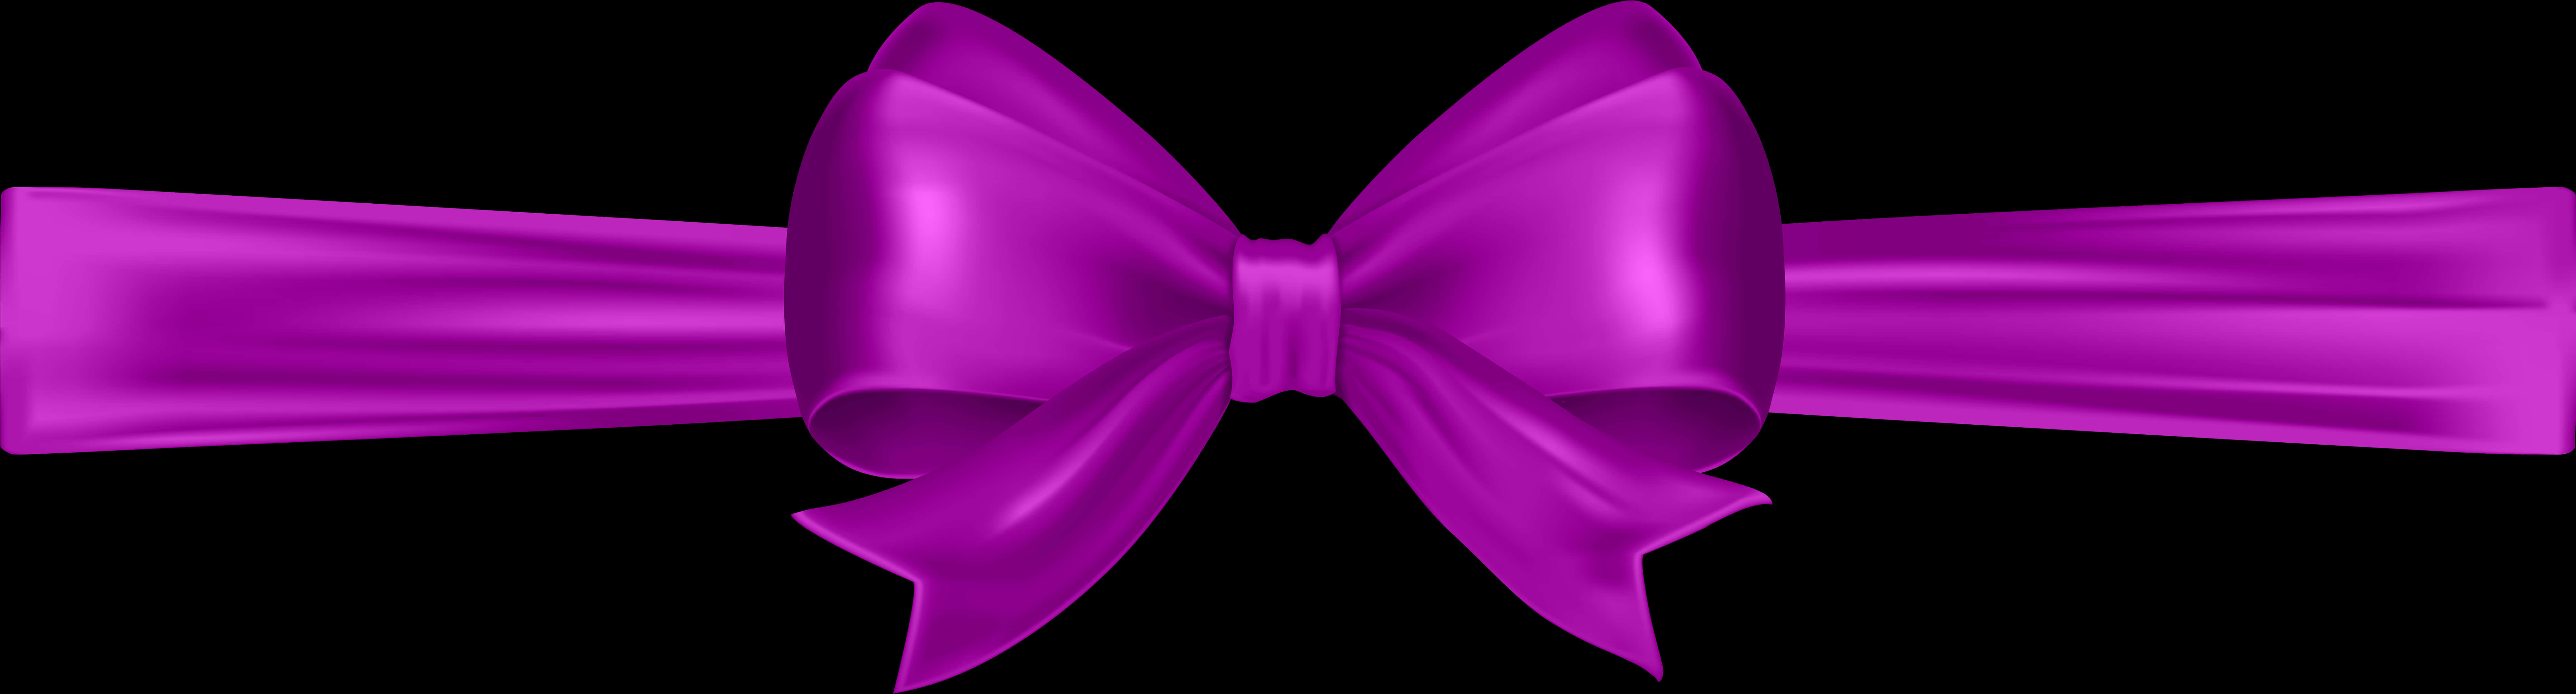 Purple Satin Gift Bow PNG image